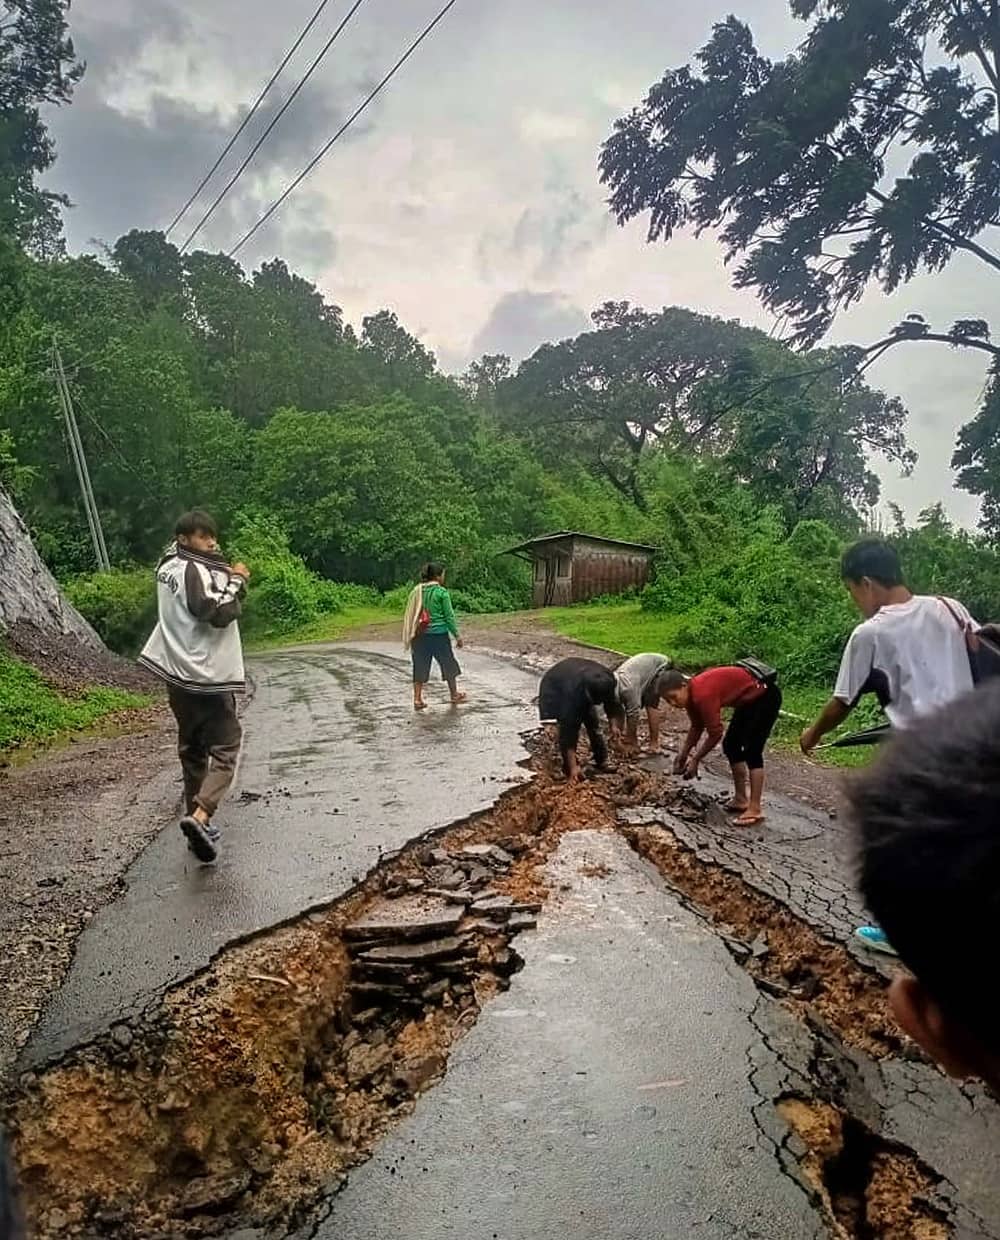 Locals inspecting a damaged road in Assam